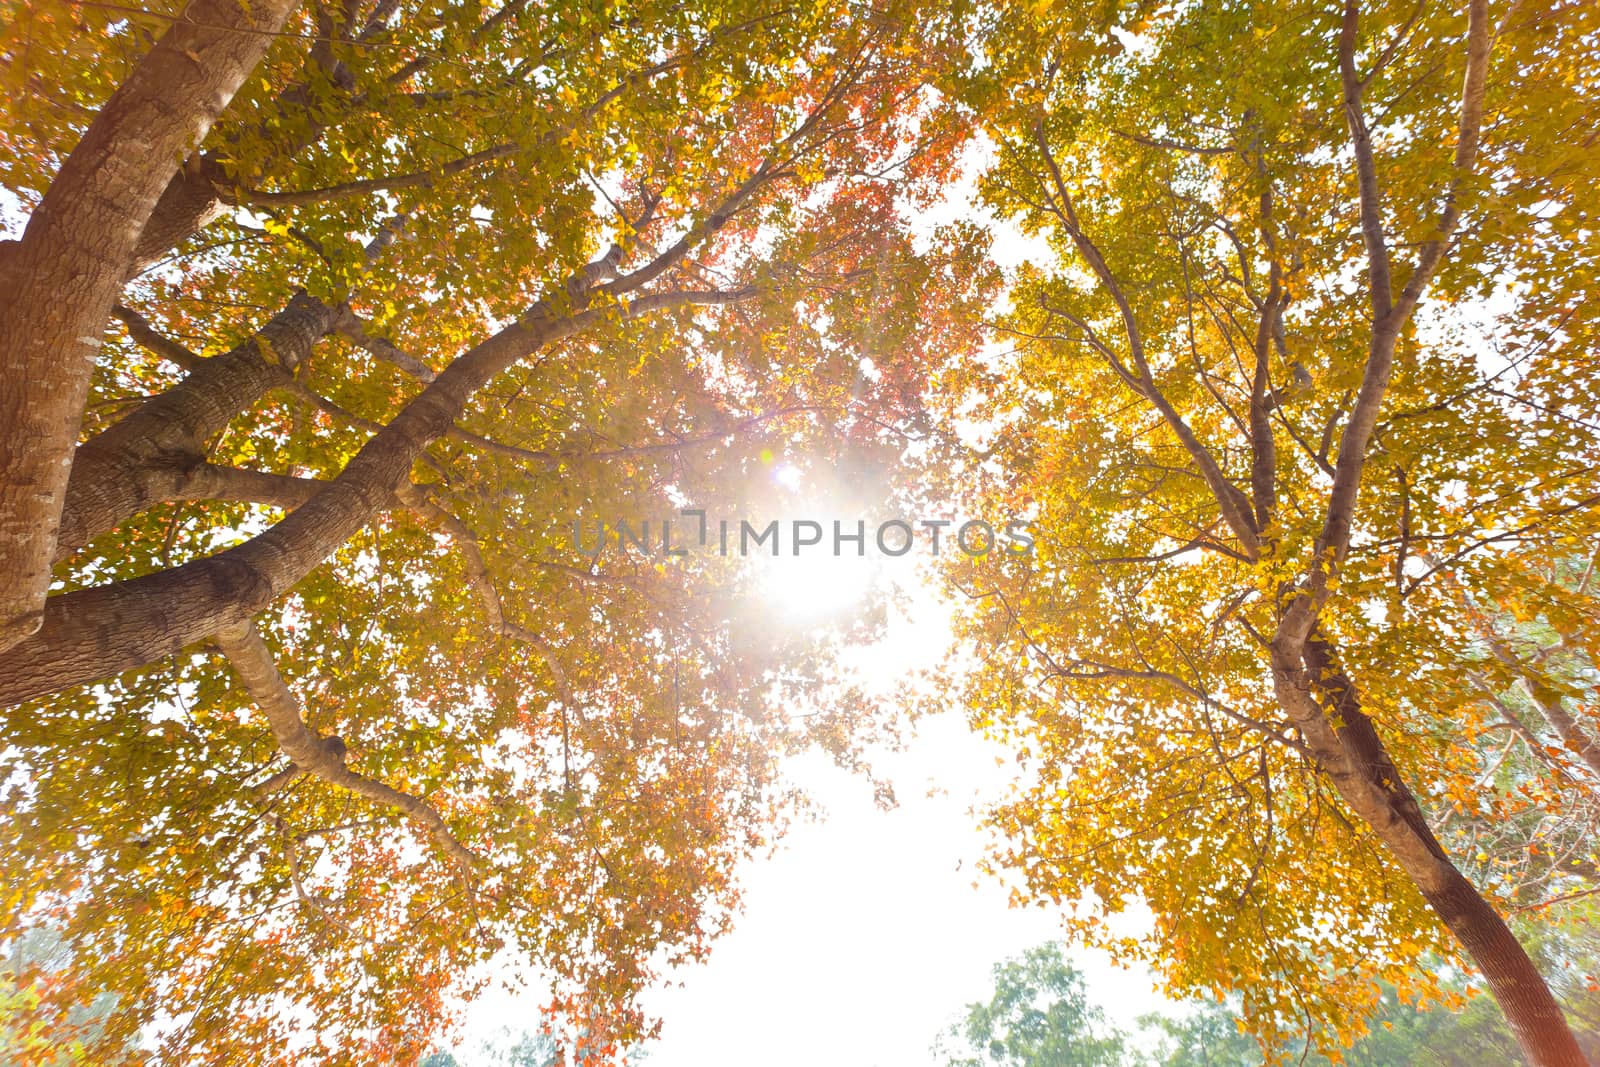 Autumn trees background by kawing921